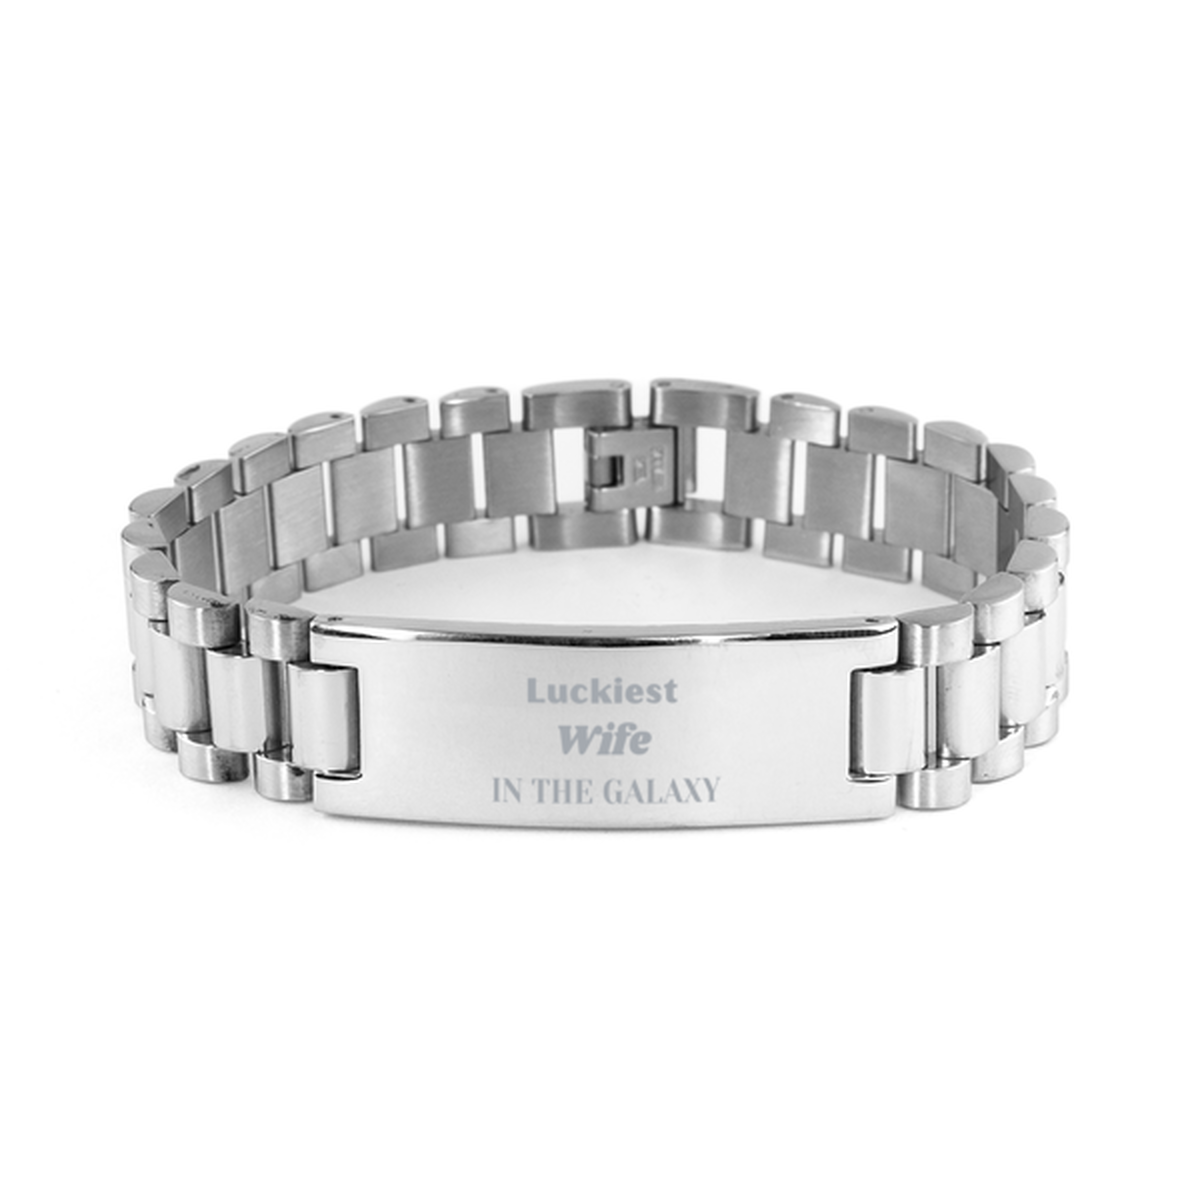 Luckiest Wife in the Galaxy, To My Wife Engraved Gifts, Christmas Wife Ladder Stainless Steel Bracelet Gifts, X-mas Birthday Unique Gifts For Wife Men Women